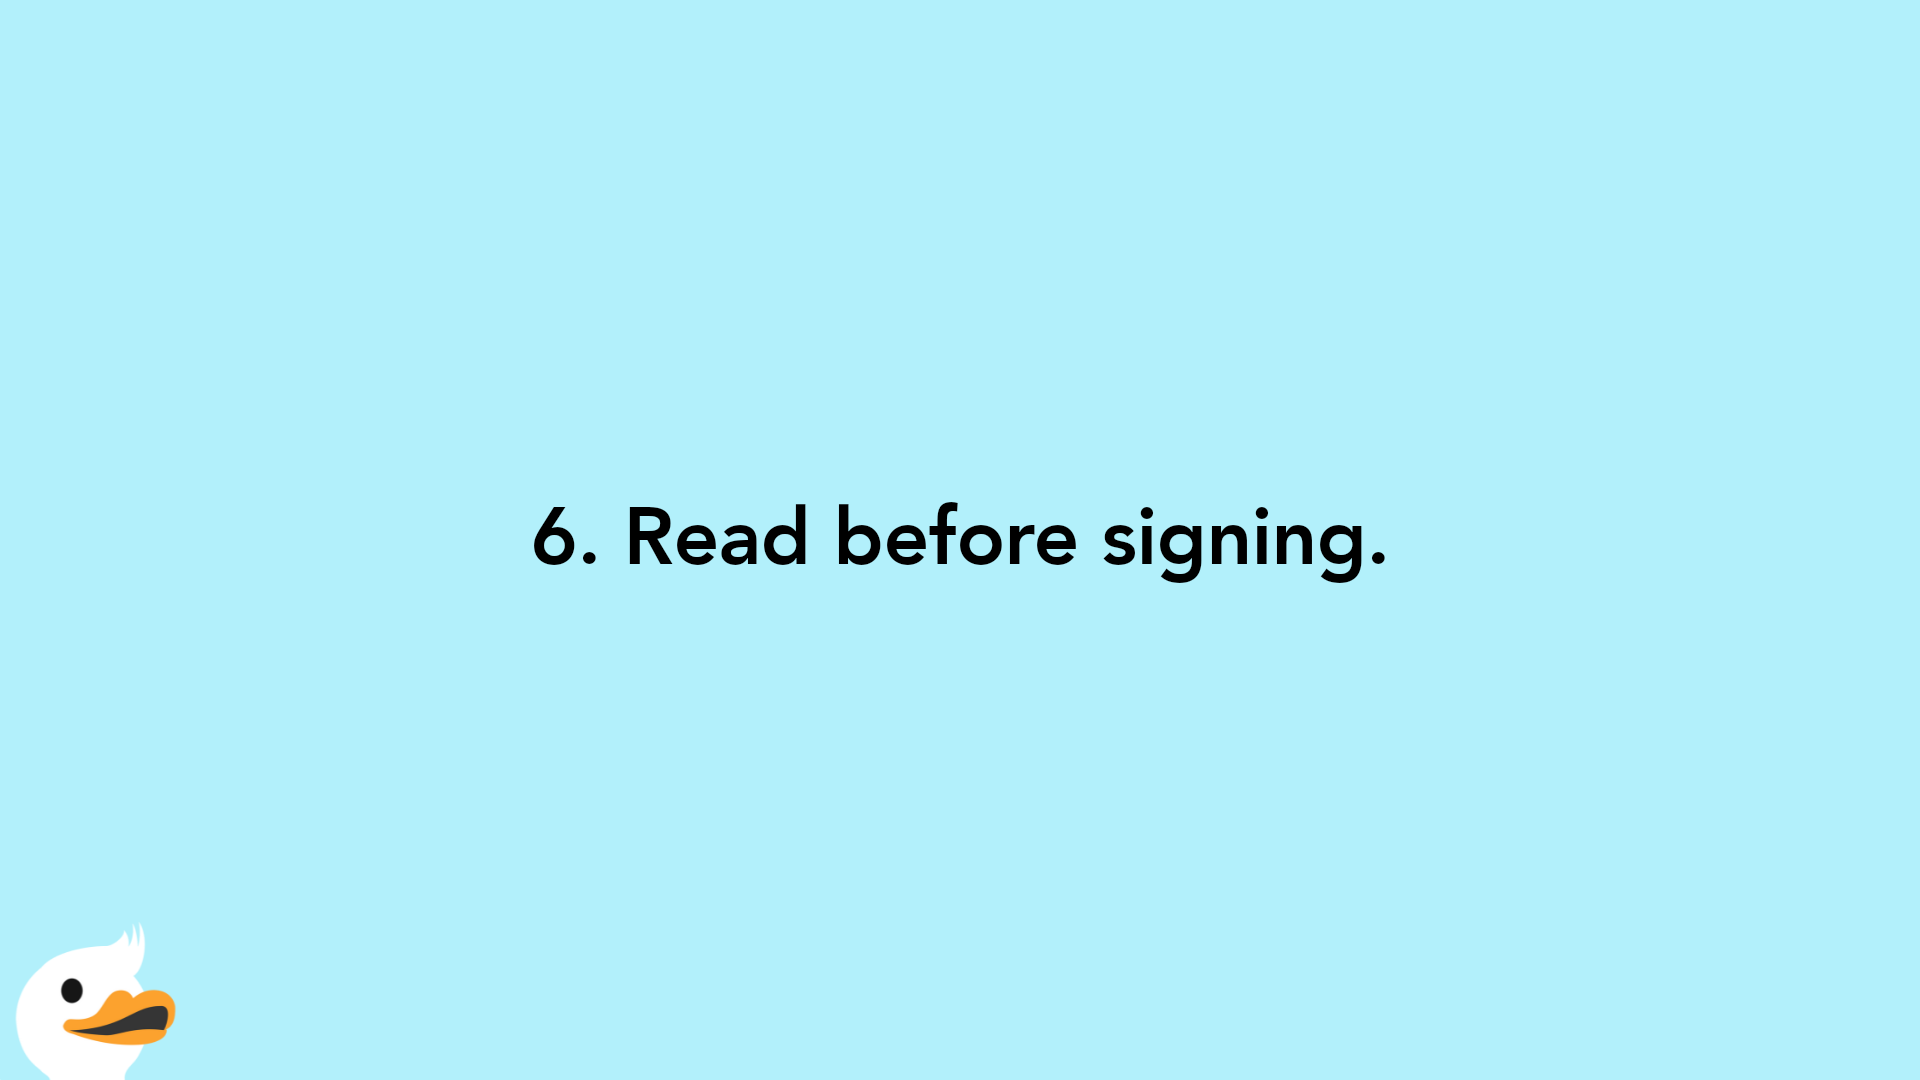 6. Read before signing.